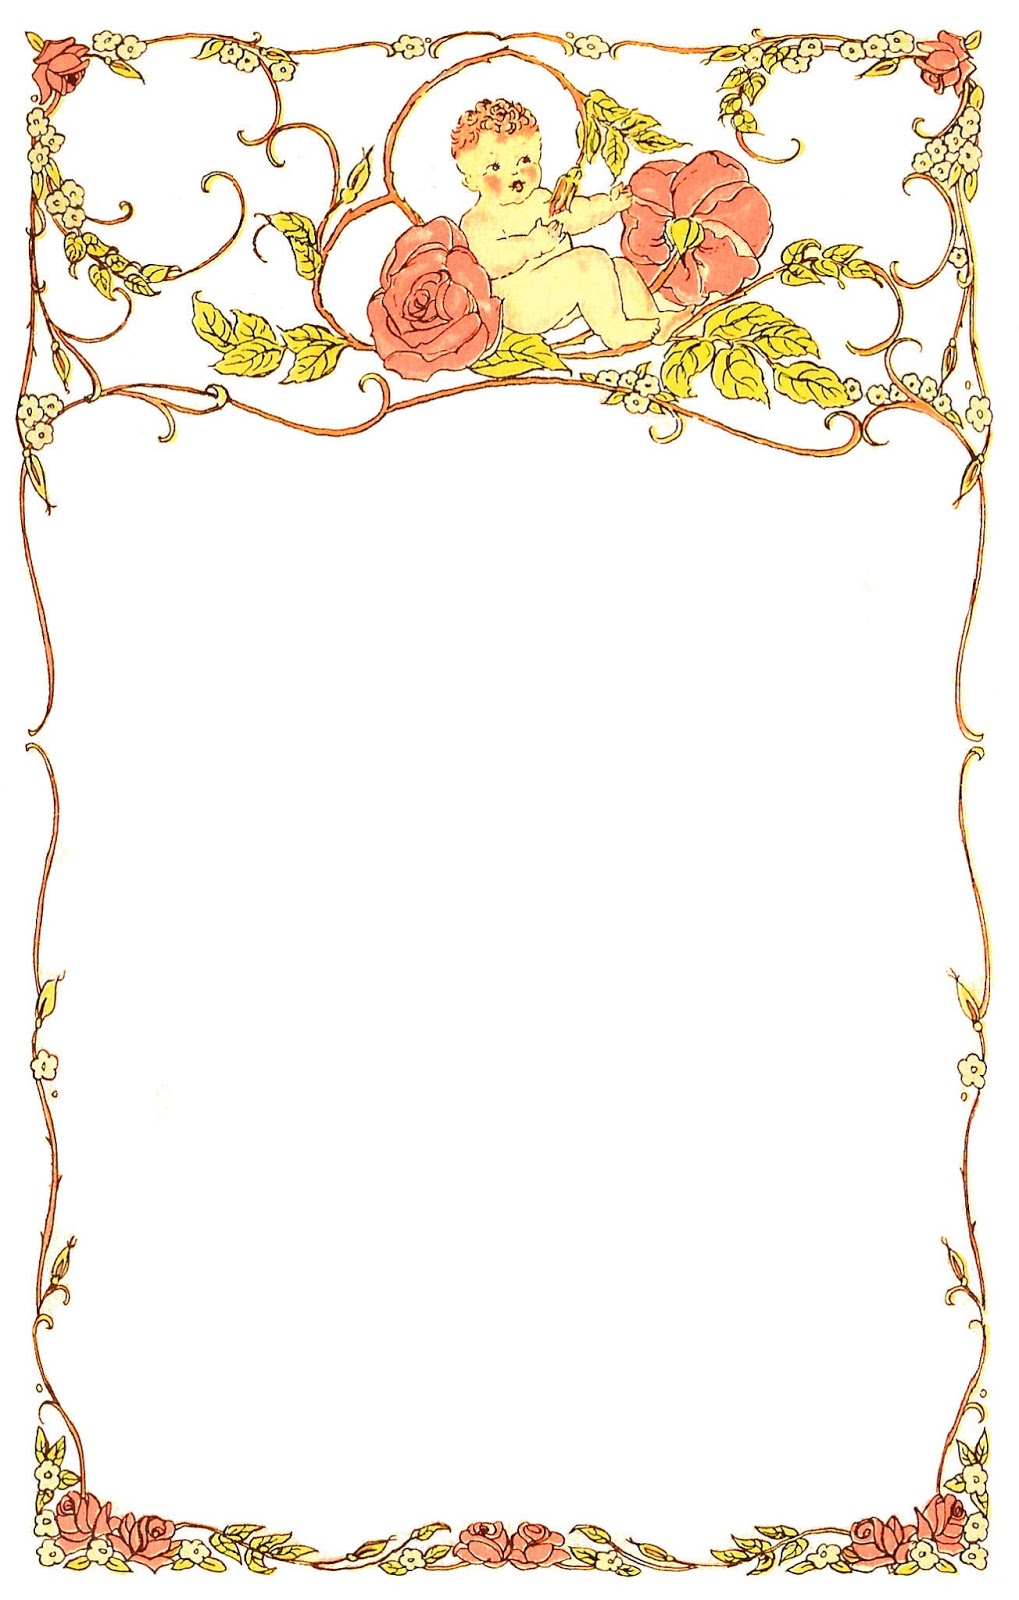 free baby clipart borders frames - photo #38